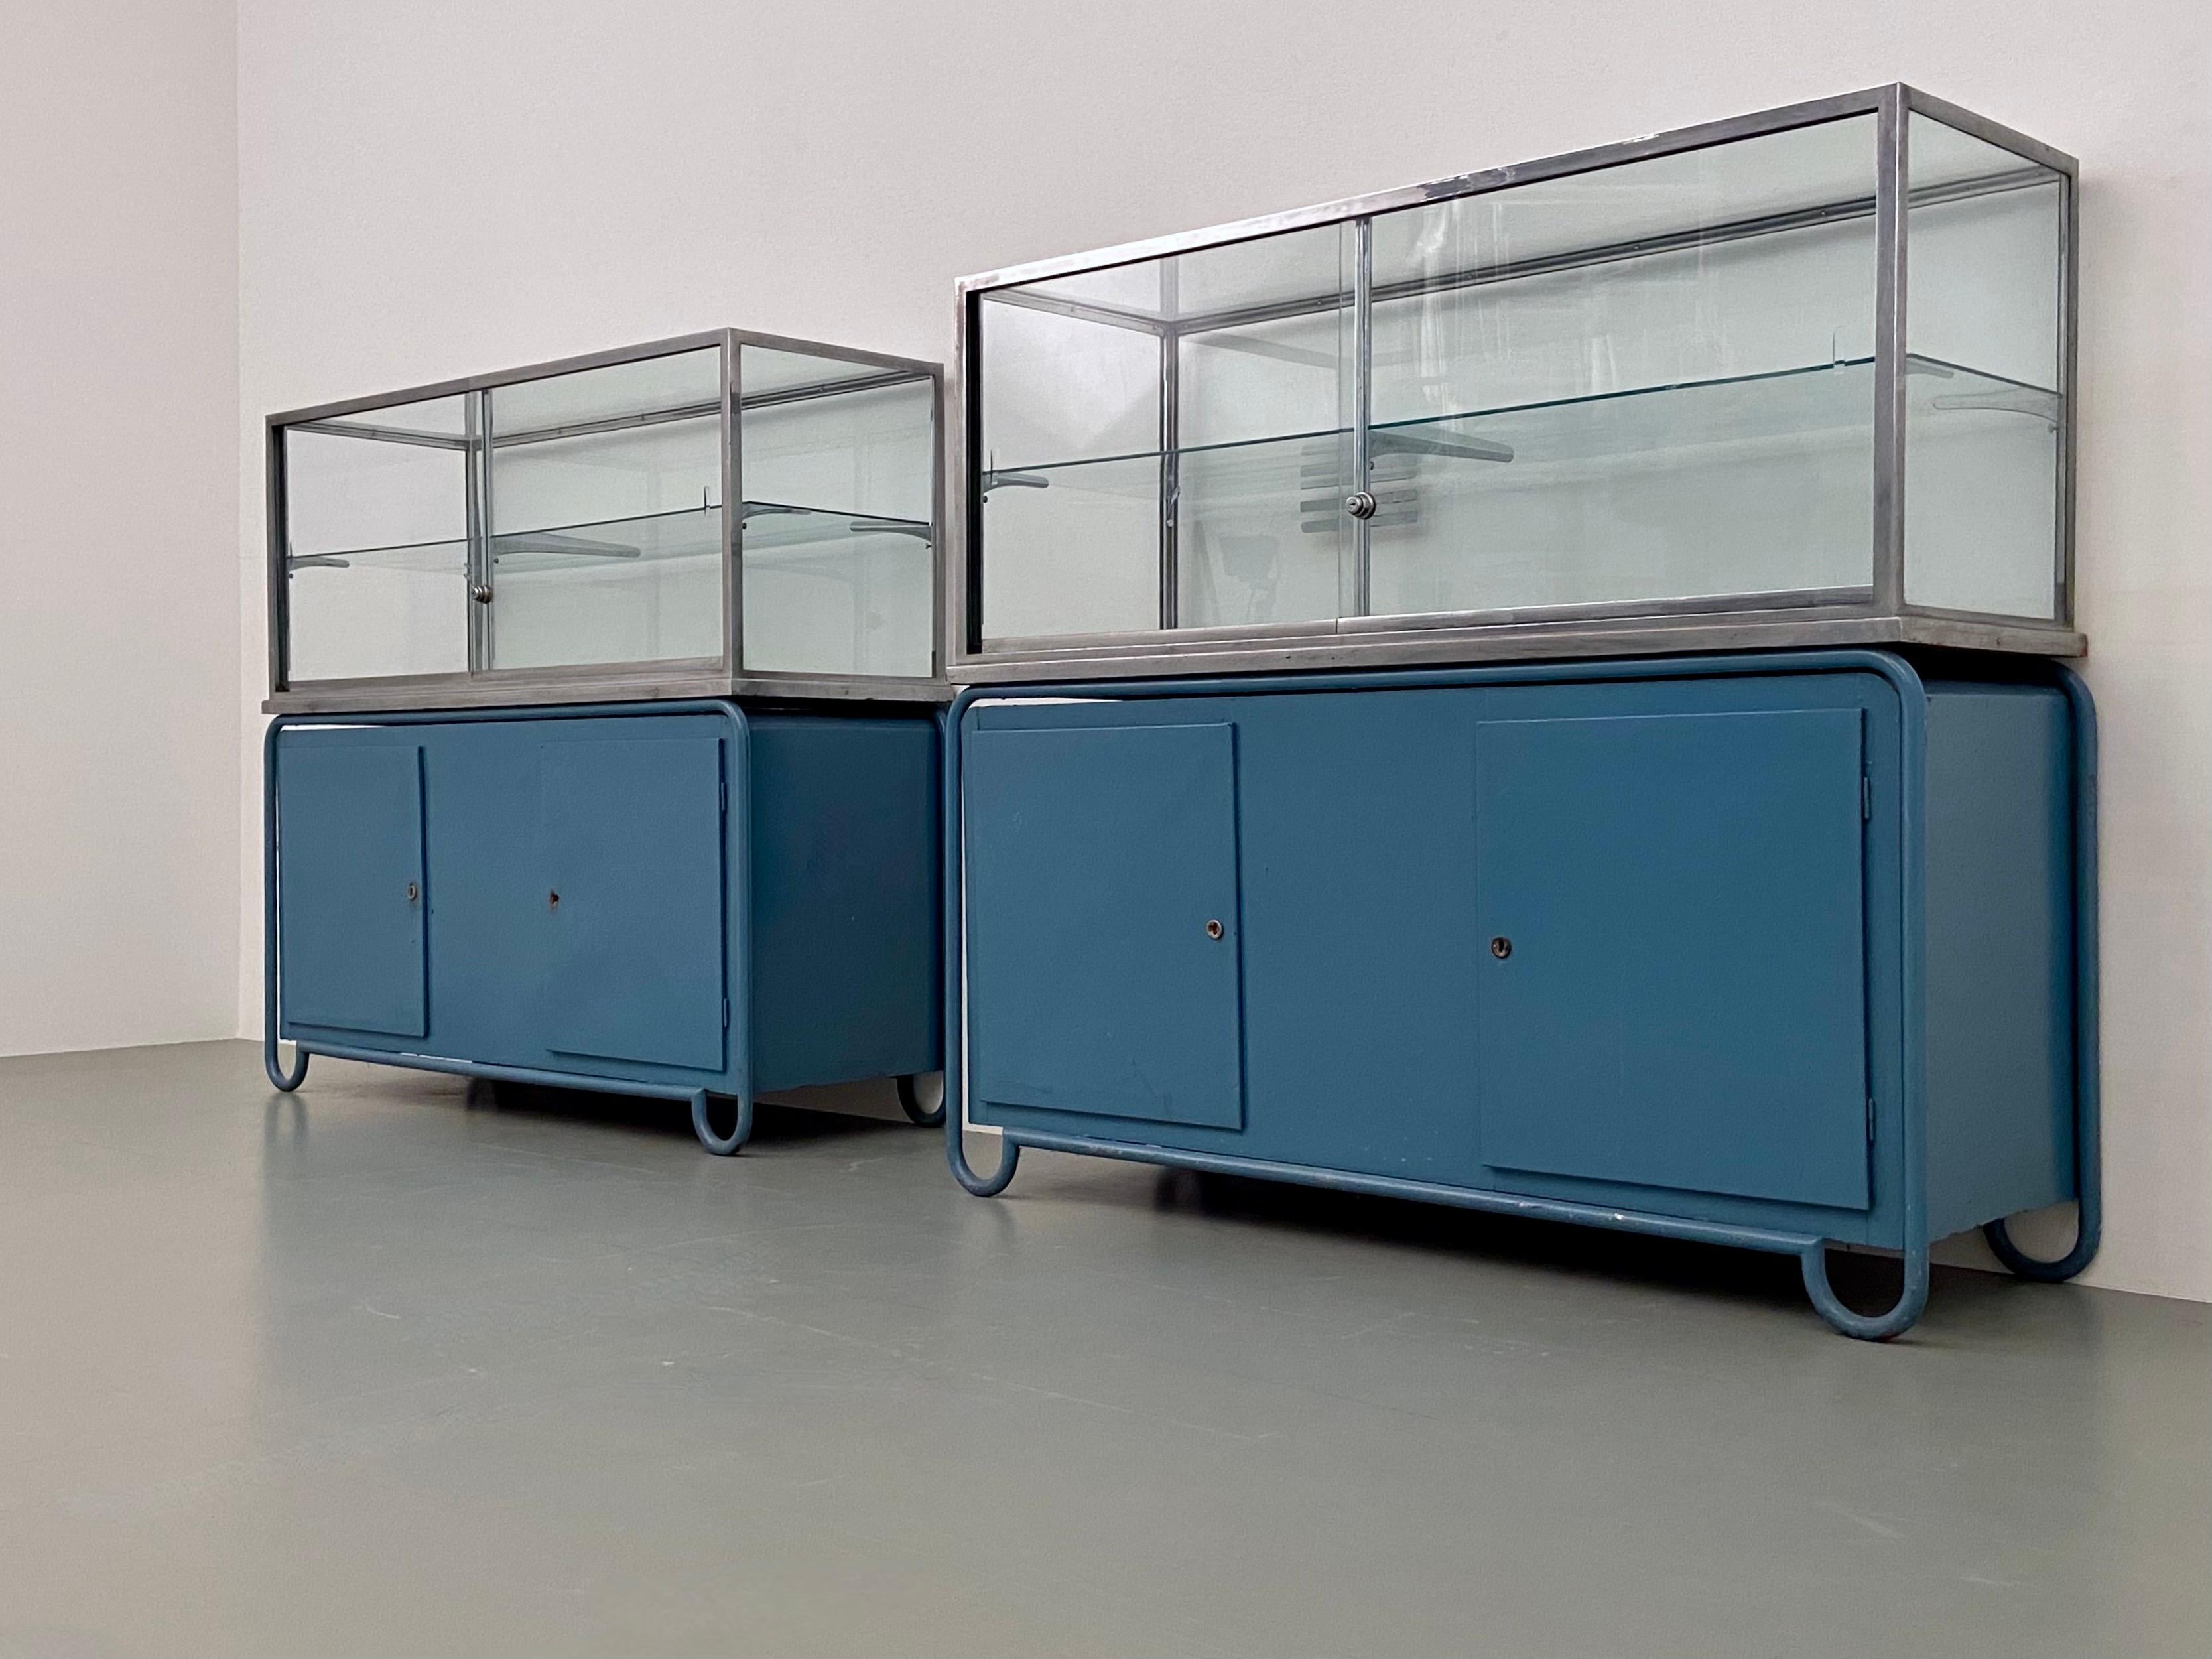 Set of 2 'Fiera Milano' Display Cabinets in Glass, Steel and Wood, Italy, 1950s For Sale 4